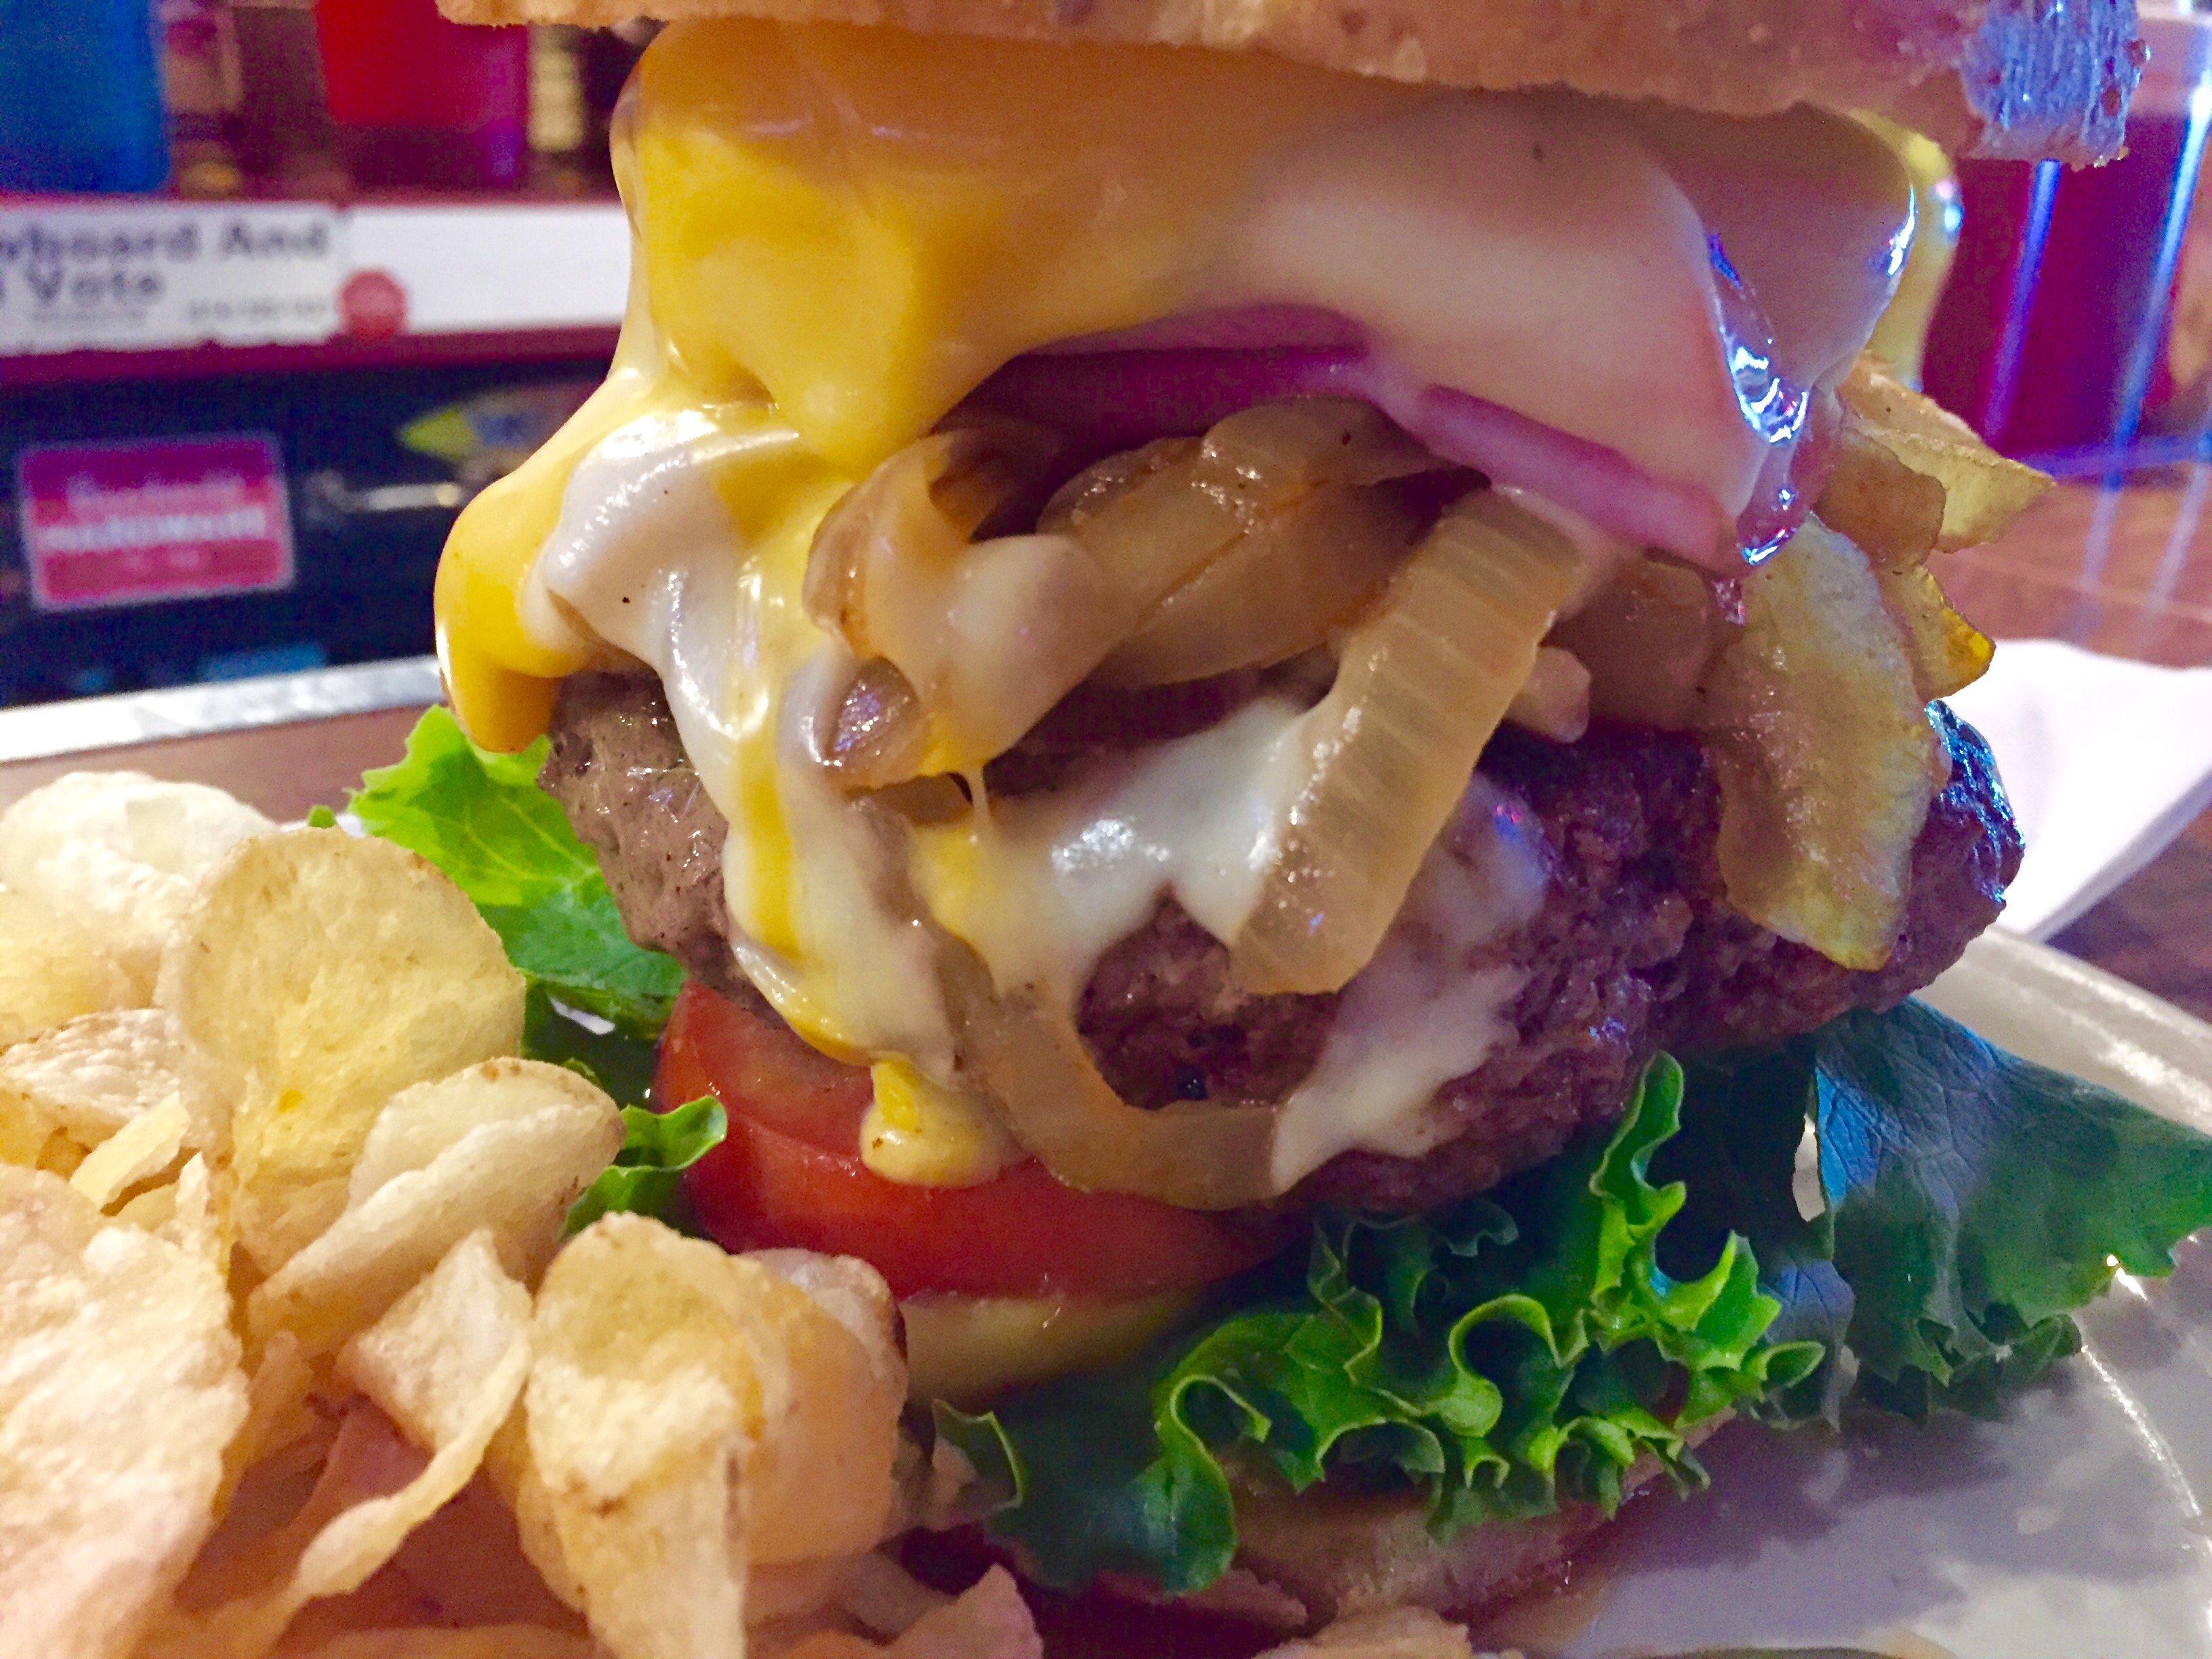 Behold, the legendary Thurman Burger. The BIGGEST burger in Ohio!